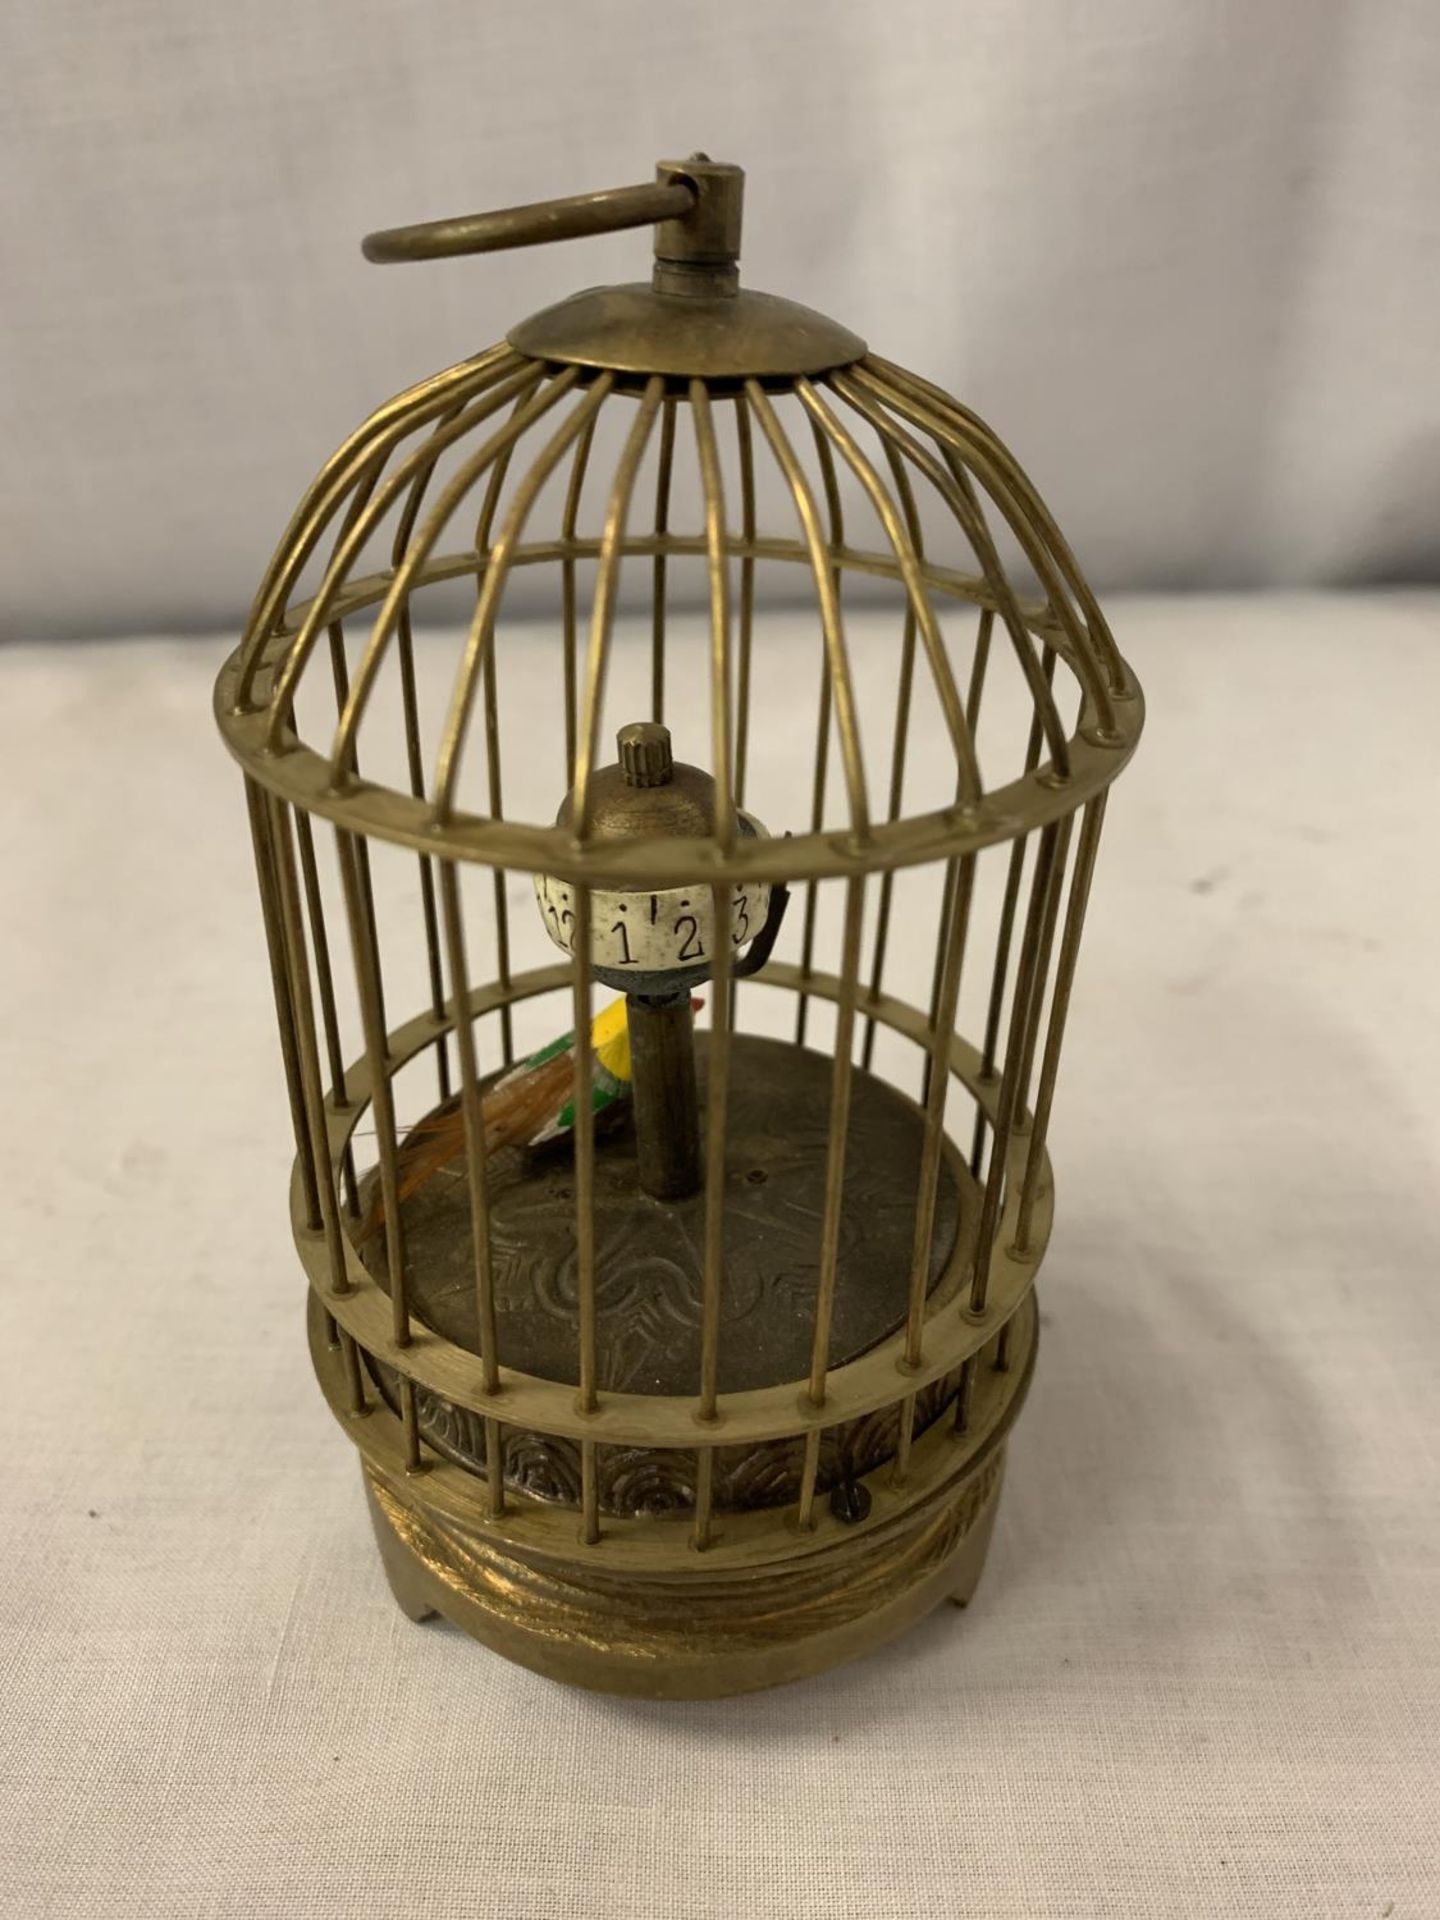 A BIRD CAGE MYSTERY CLOCK - Image 2 of 3